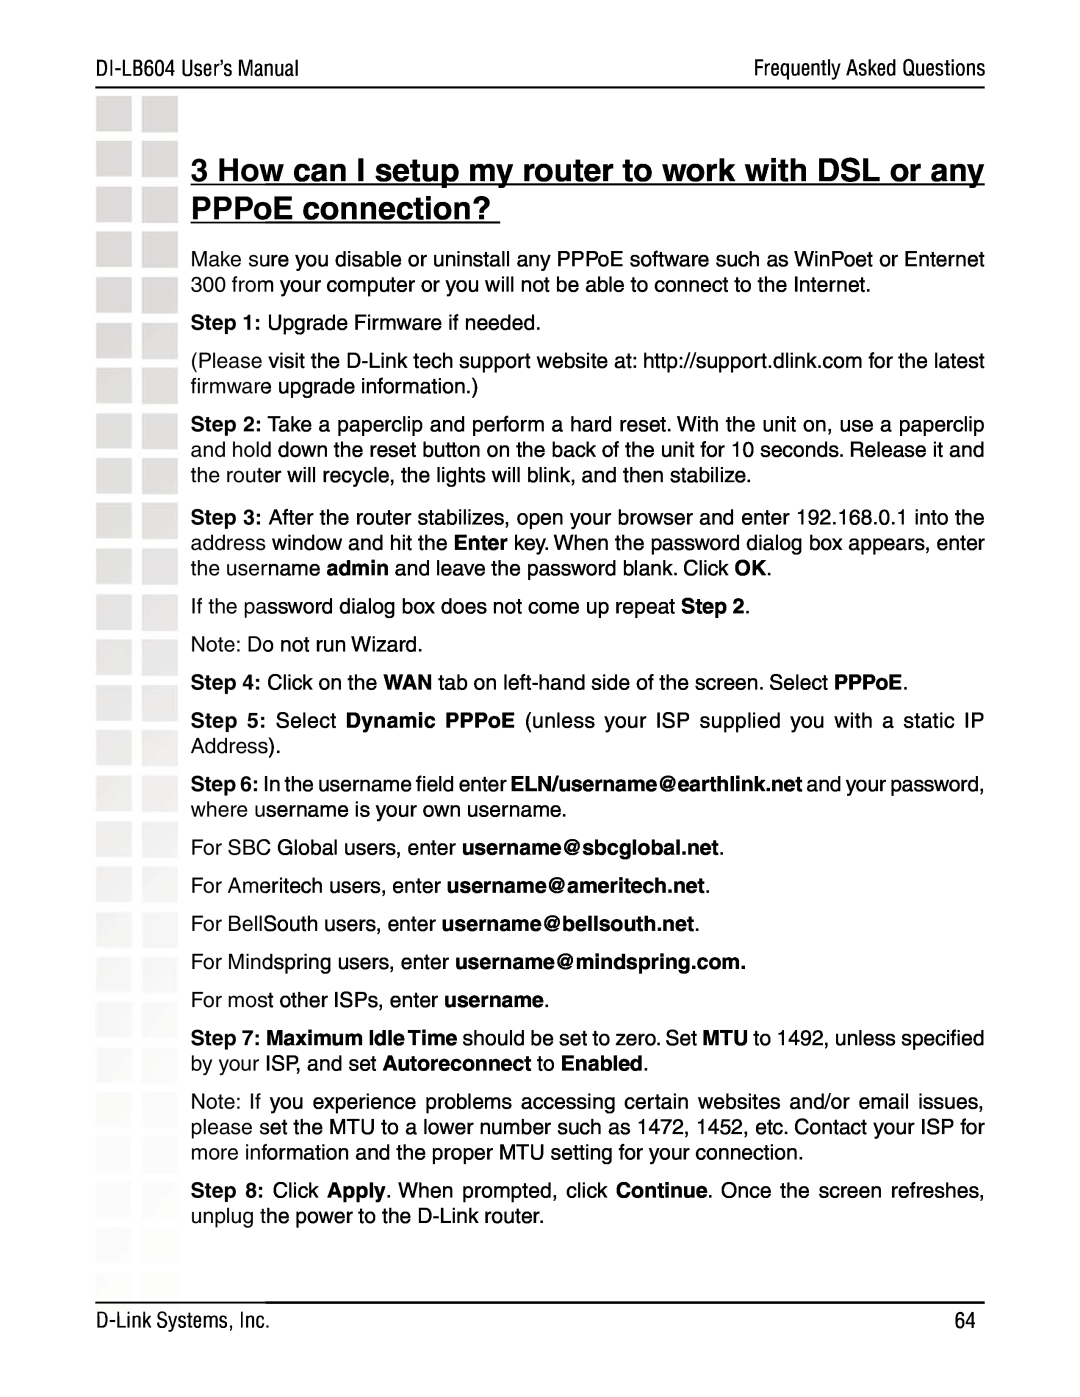 D-Link DI-LB604 manual How can I setup my router to work with DSL or any PPPoE connection? 